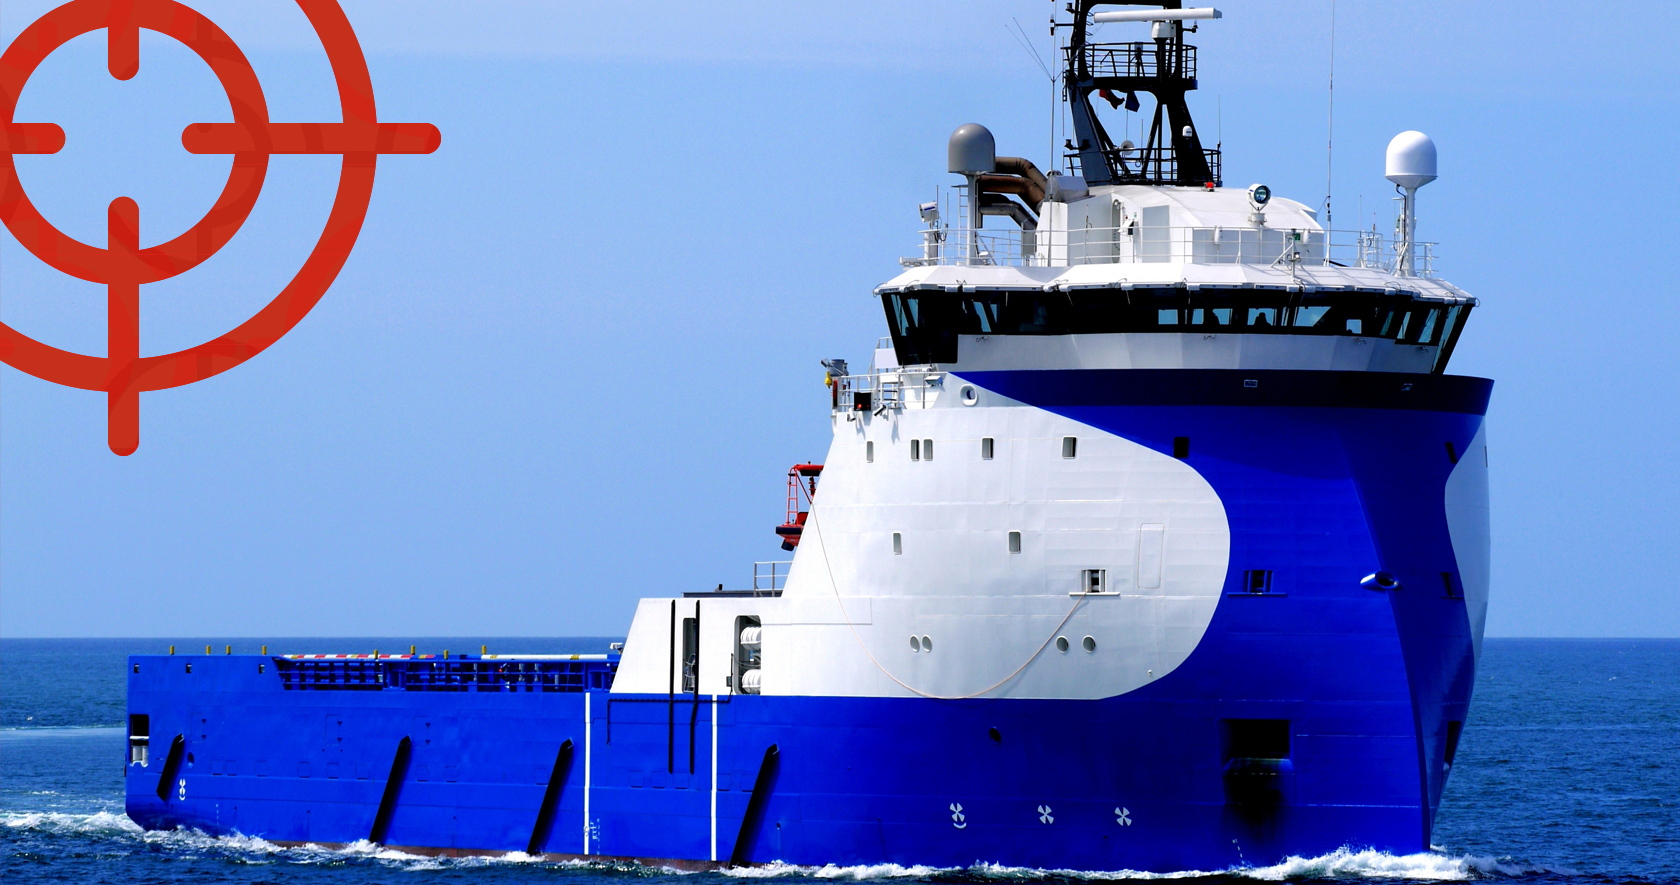 White and blue supplu ship on the ocean.